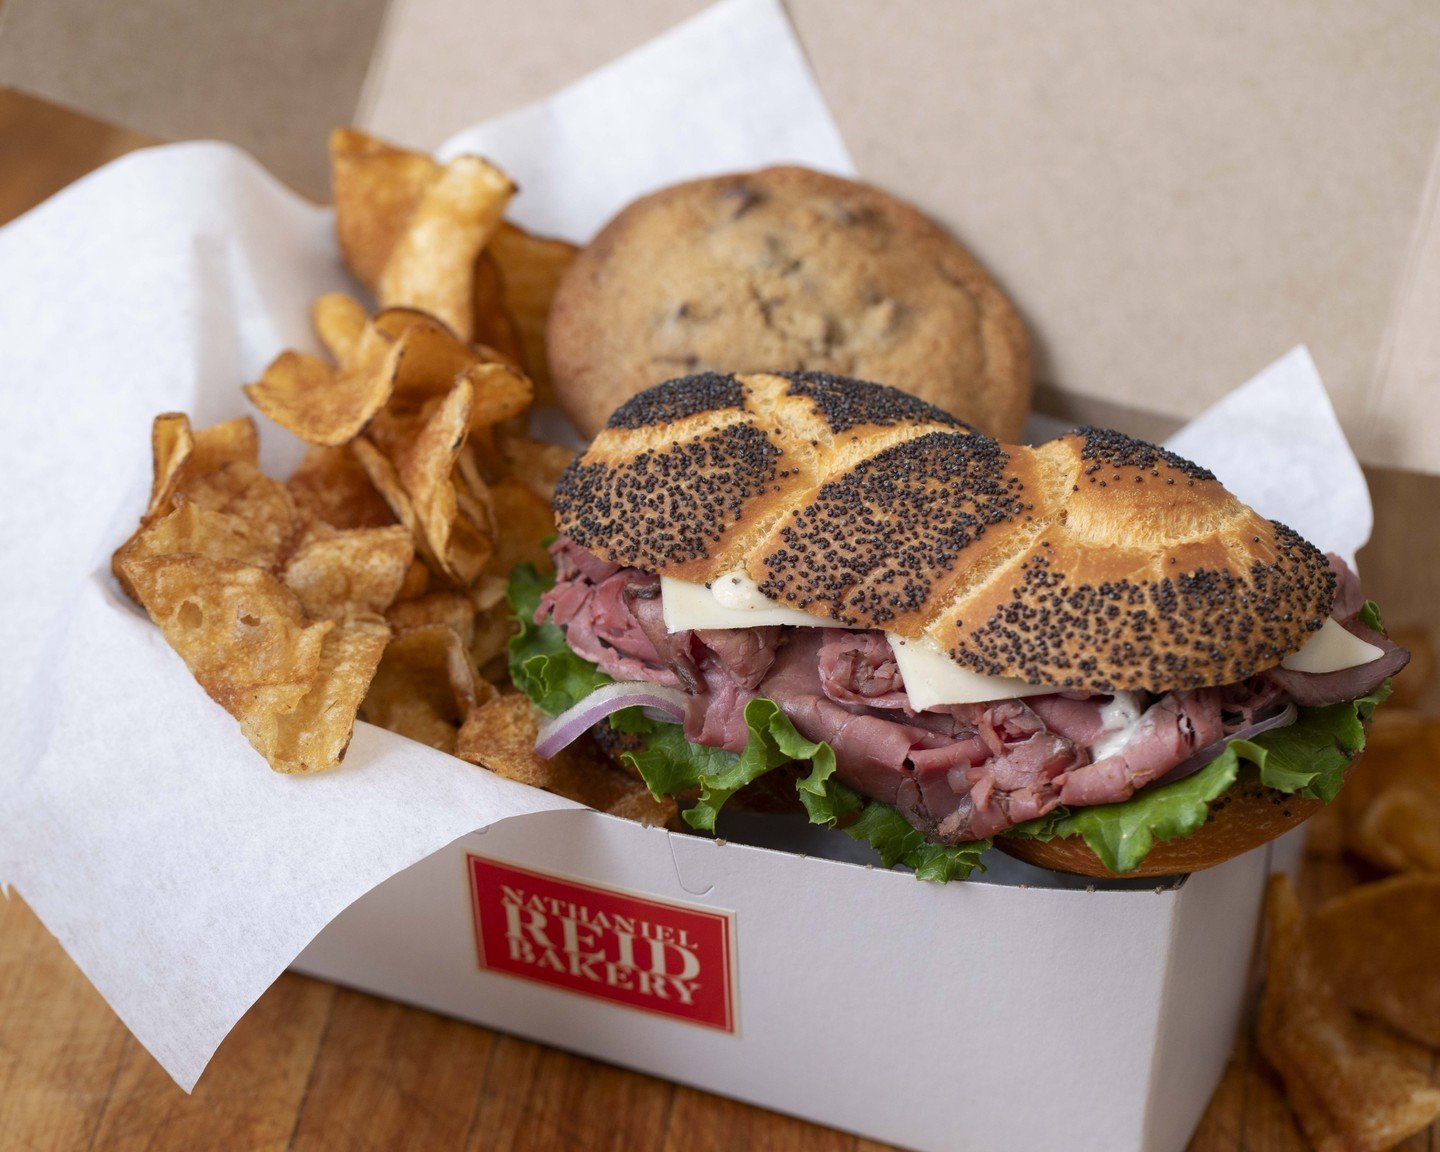 It's picnic season! Let us make your outdoor lunch extra special with our delicious boxed lunches. What better way to enjoy the beautiful weather than while savoring your favorite sandwich, freshly baked cookie, and crunchy locally made chips? Order 